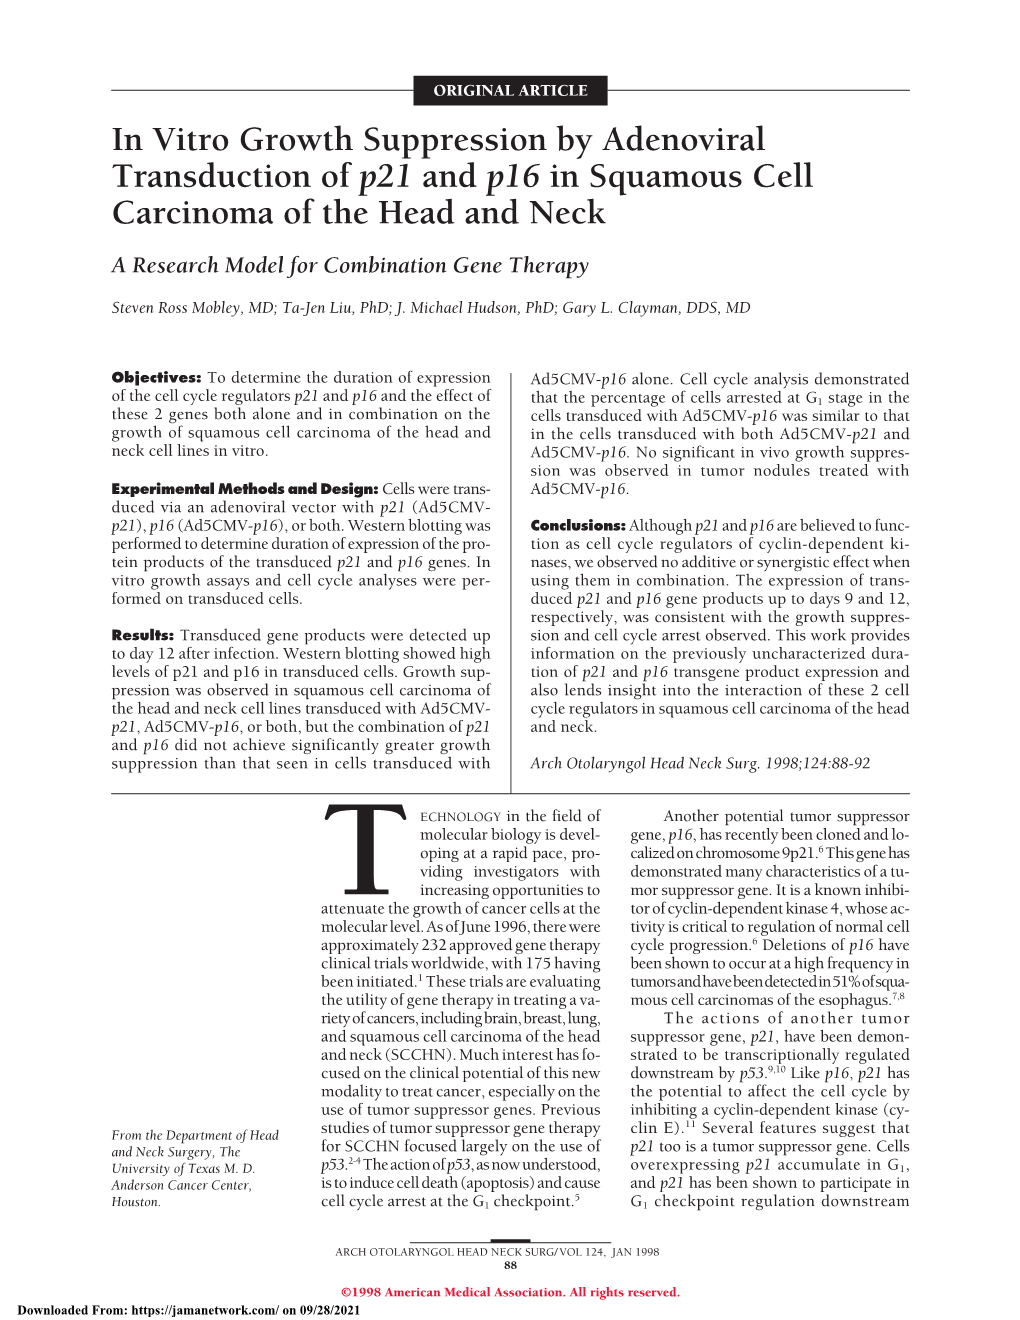 In Vitro Growth Suppression by Adenoviral Transduction of P21 and P16 in Squamous Cell Carcinoma of the Head and Neck a Research Model for Combination Gene Therapy